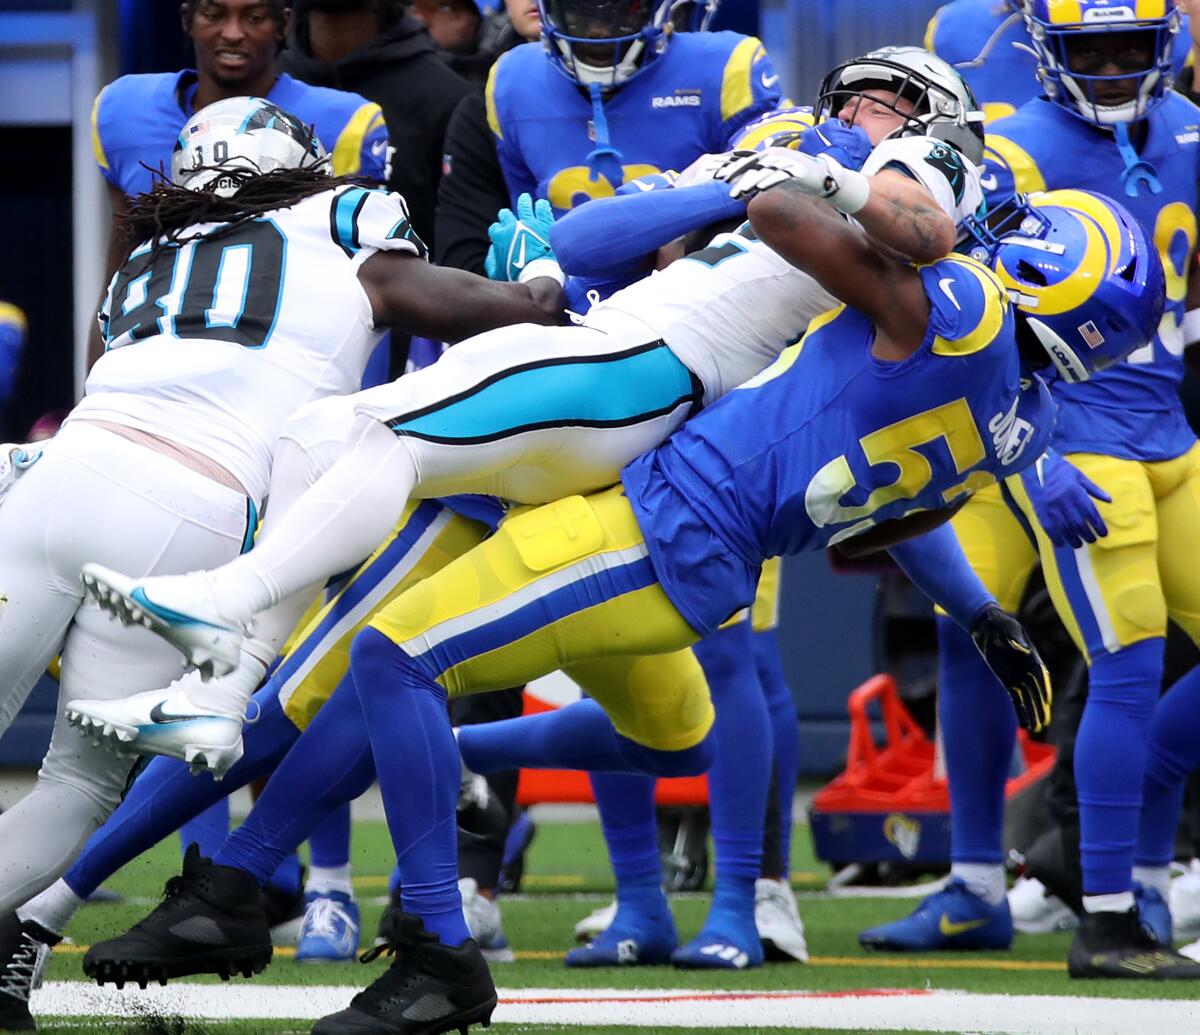 Panthers running back Christian McCaffrey is brought down hard by Rams linebacker Ernest Jones 